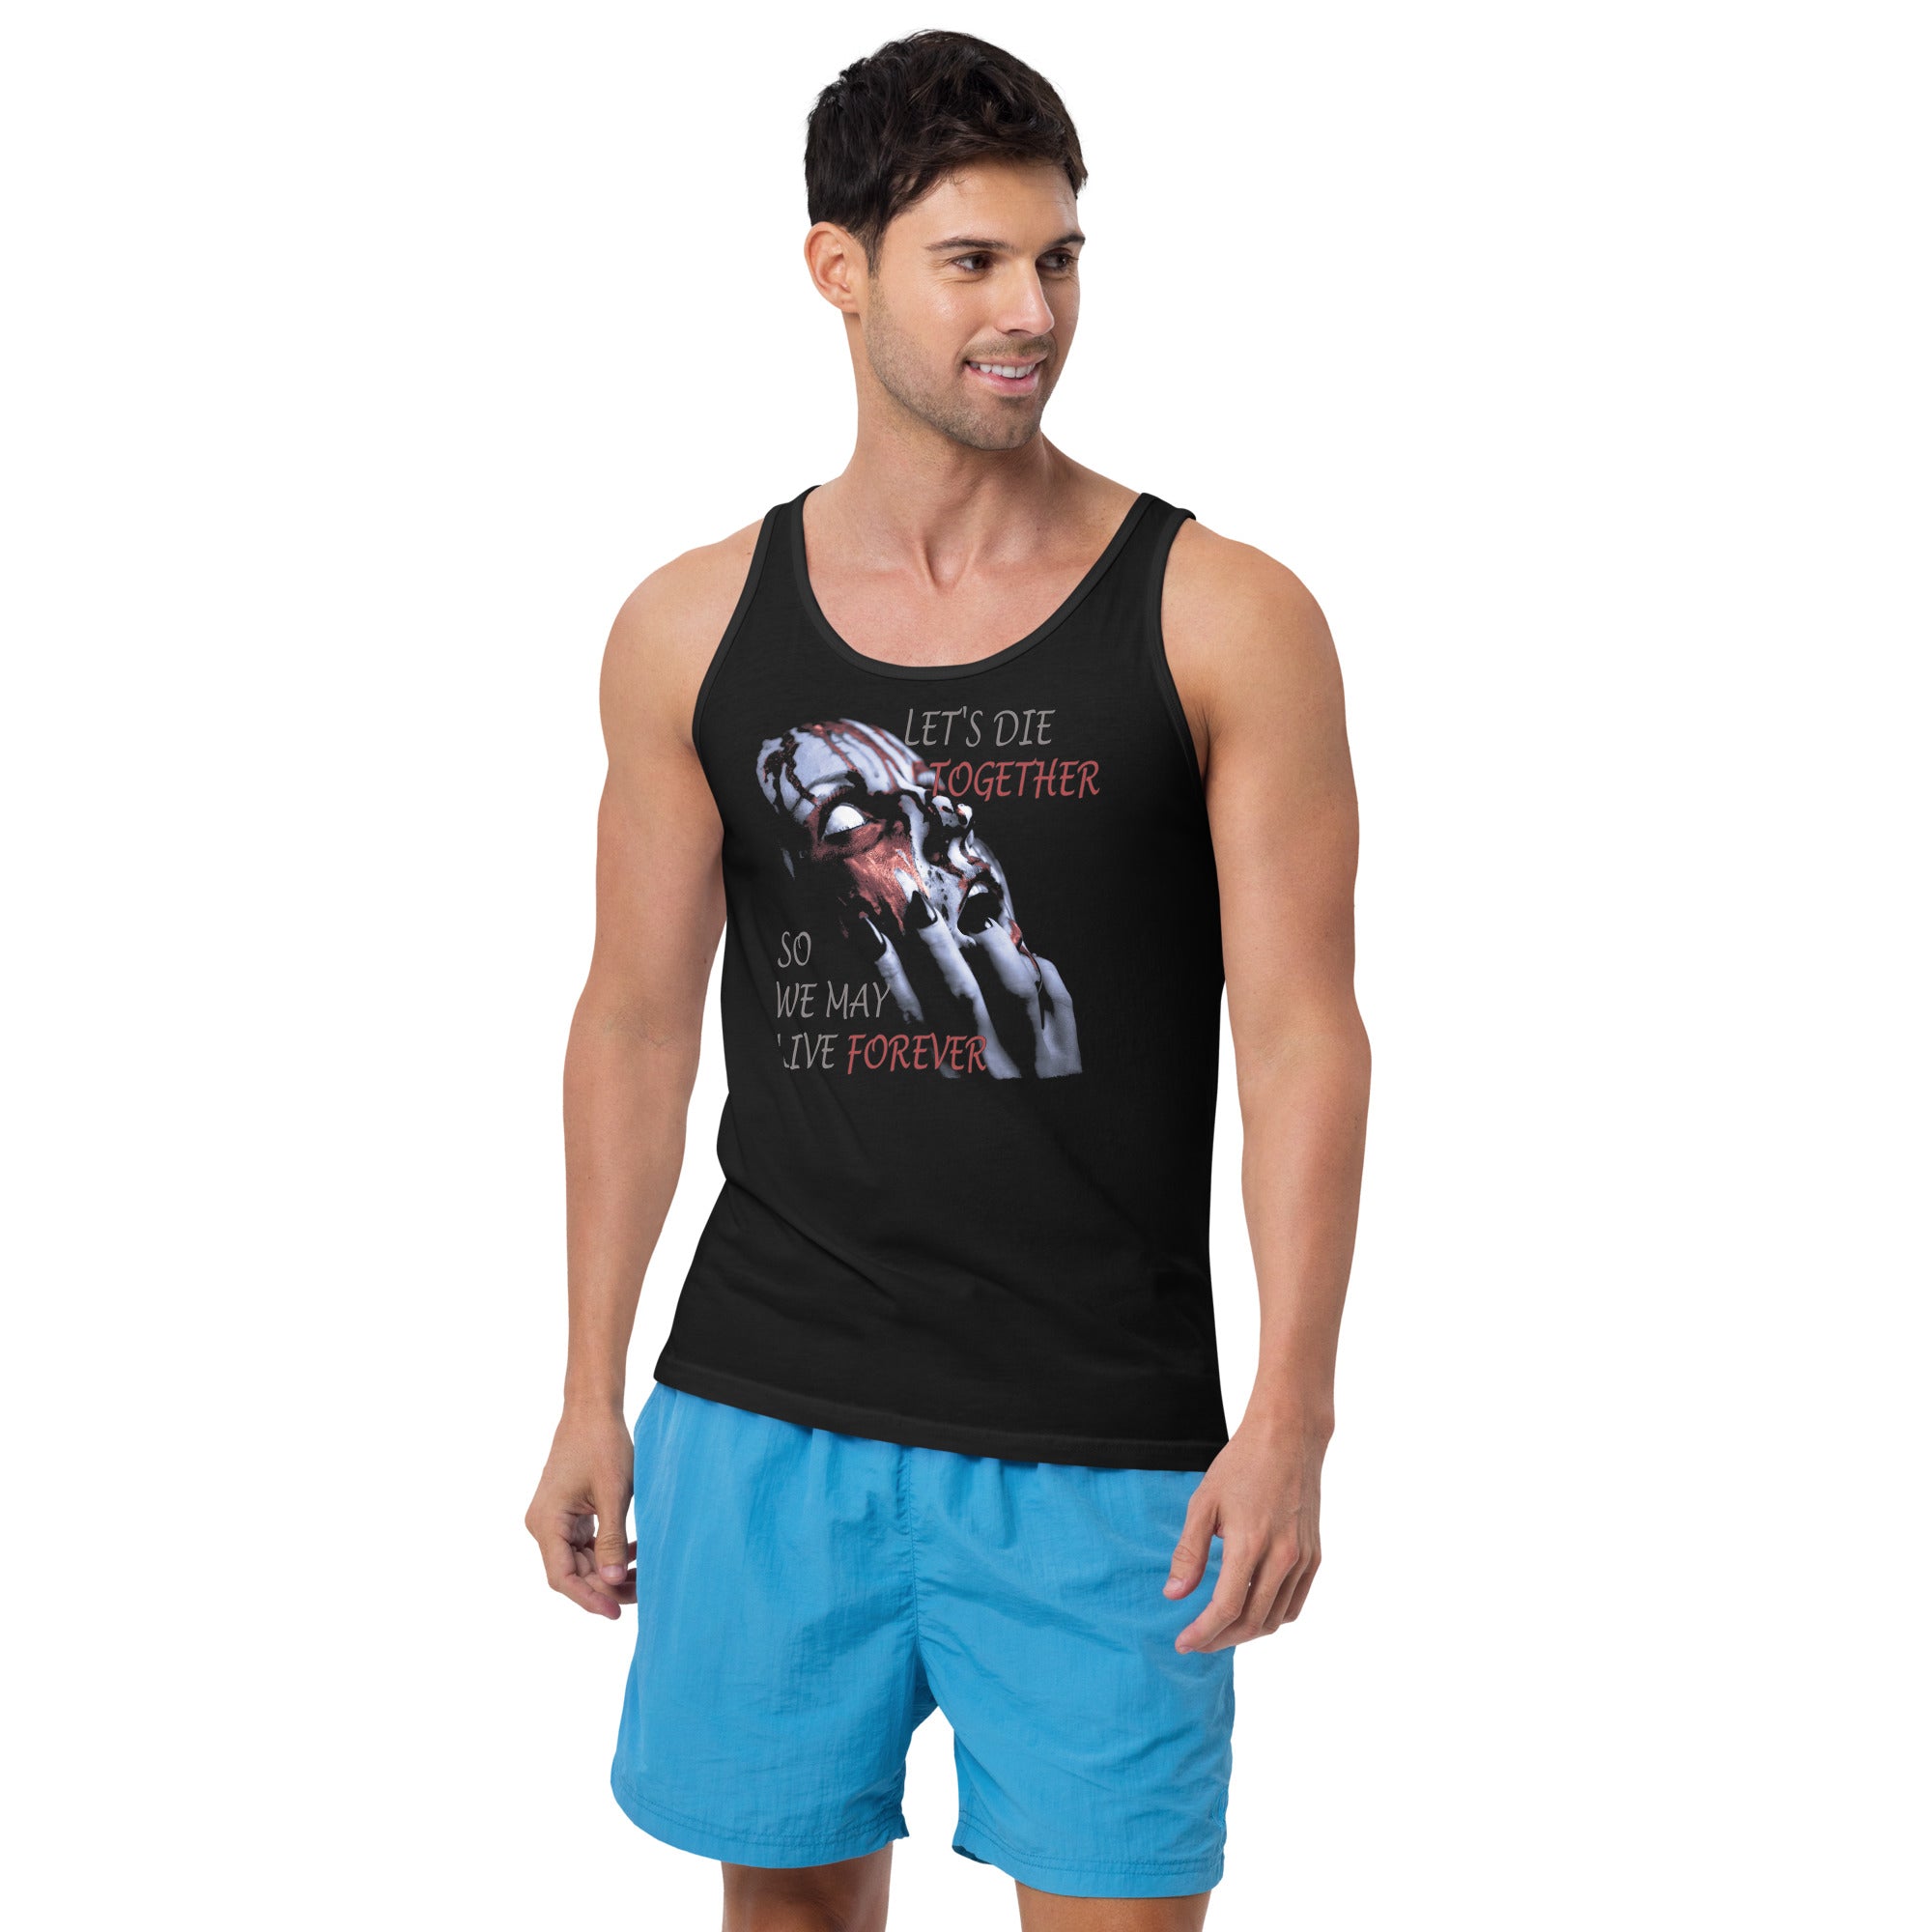 Together Forever Horror Gothic Fashion Men's Tank Top Shirt